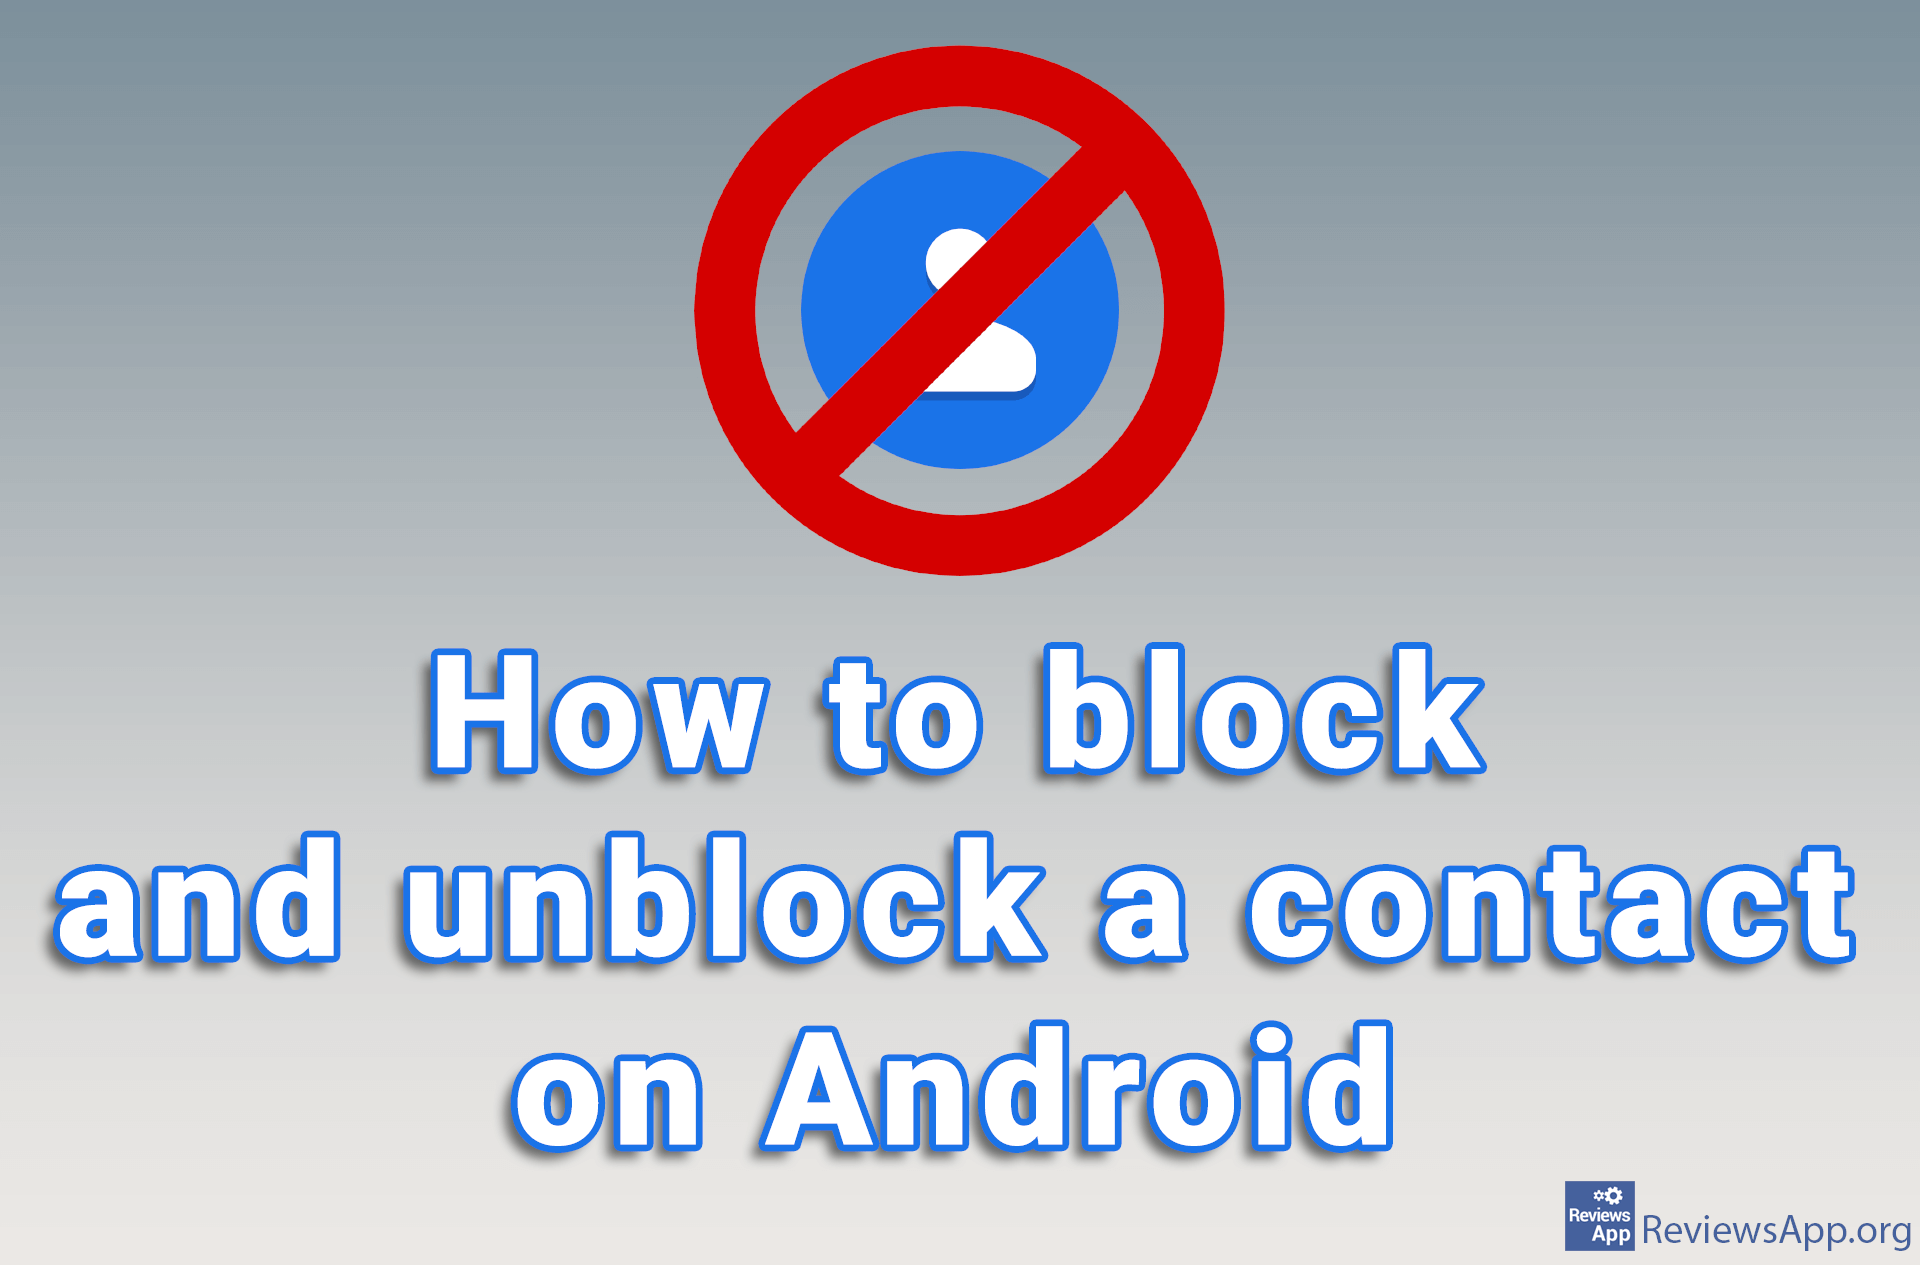 How to block and unblock a contact on Android